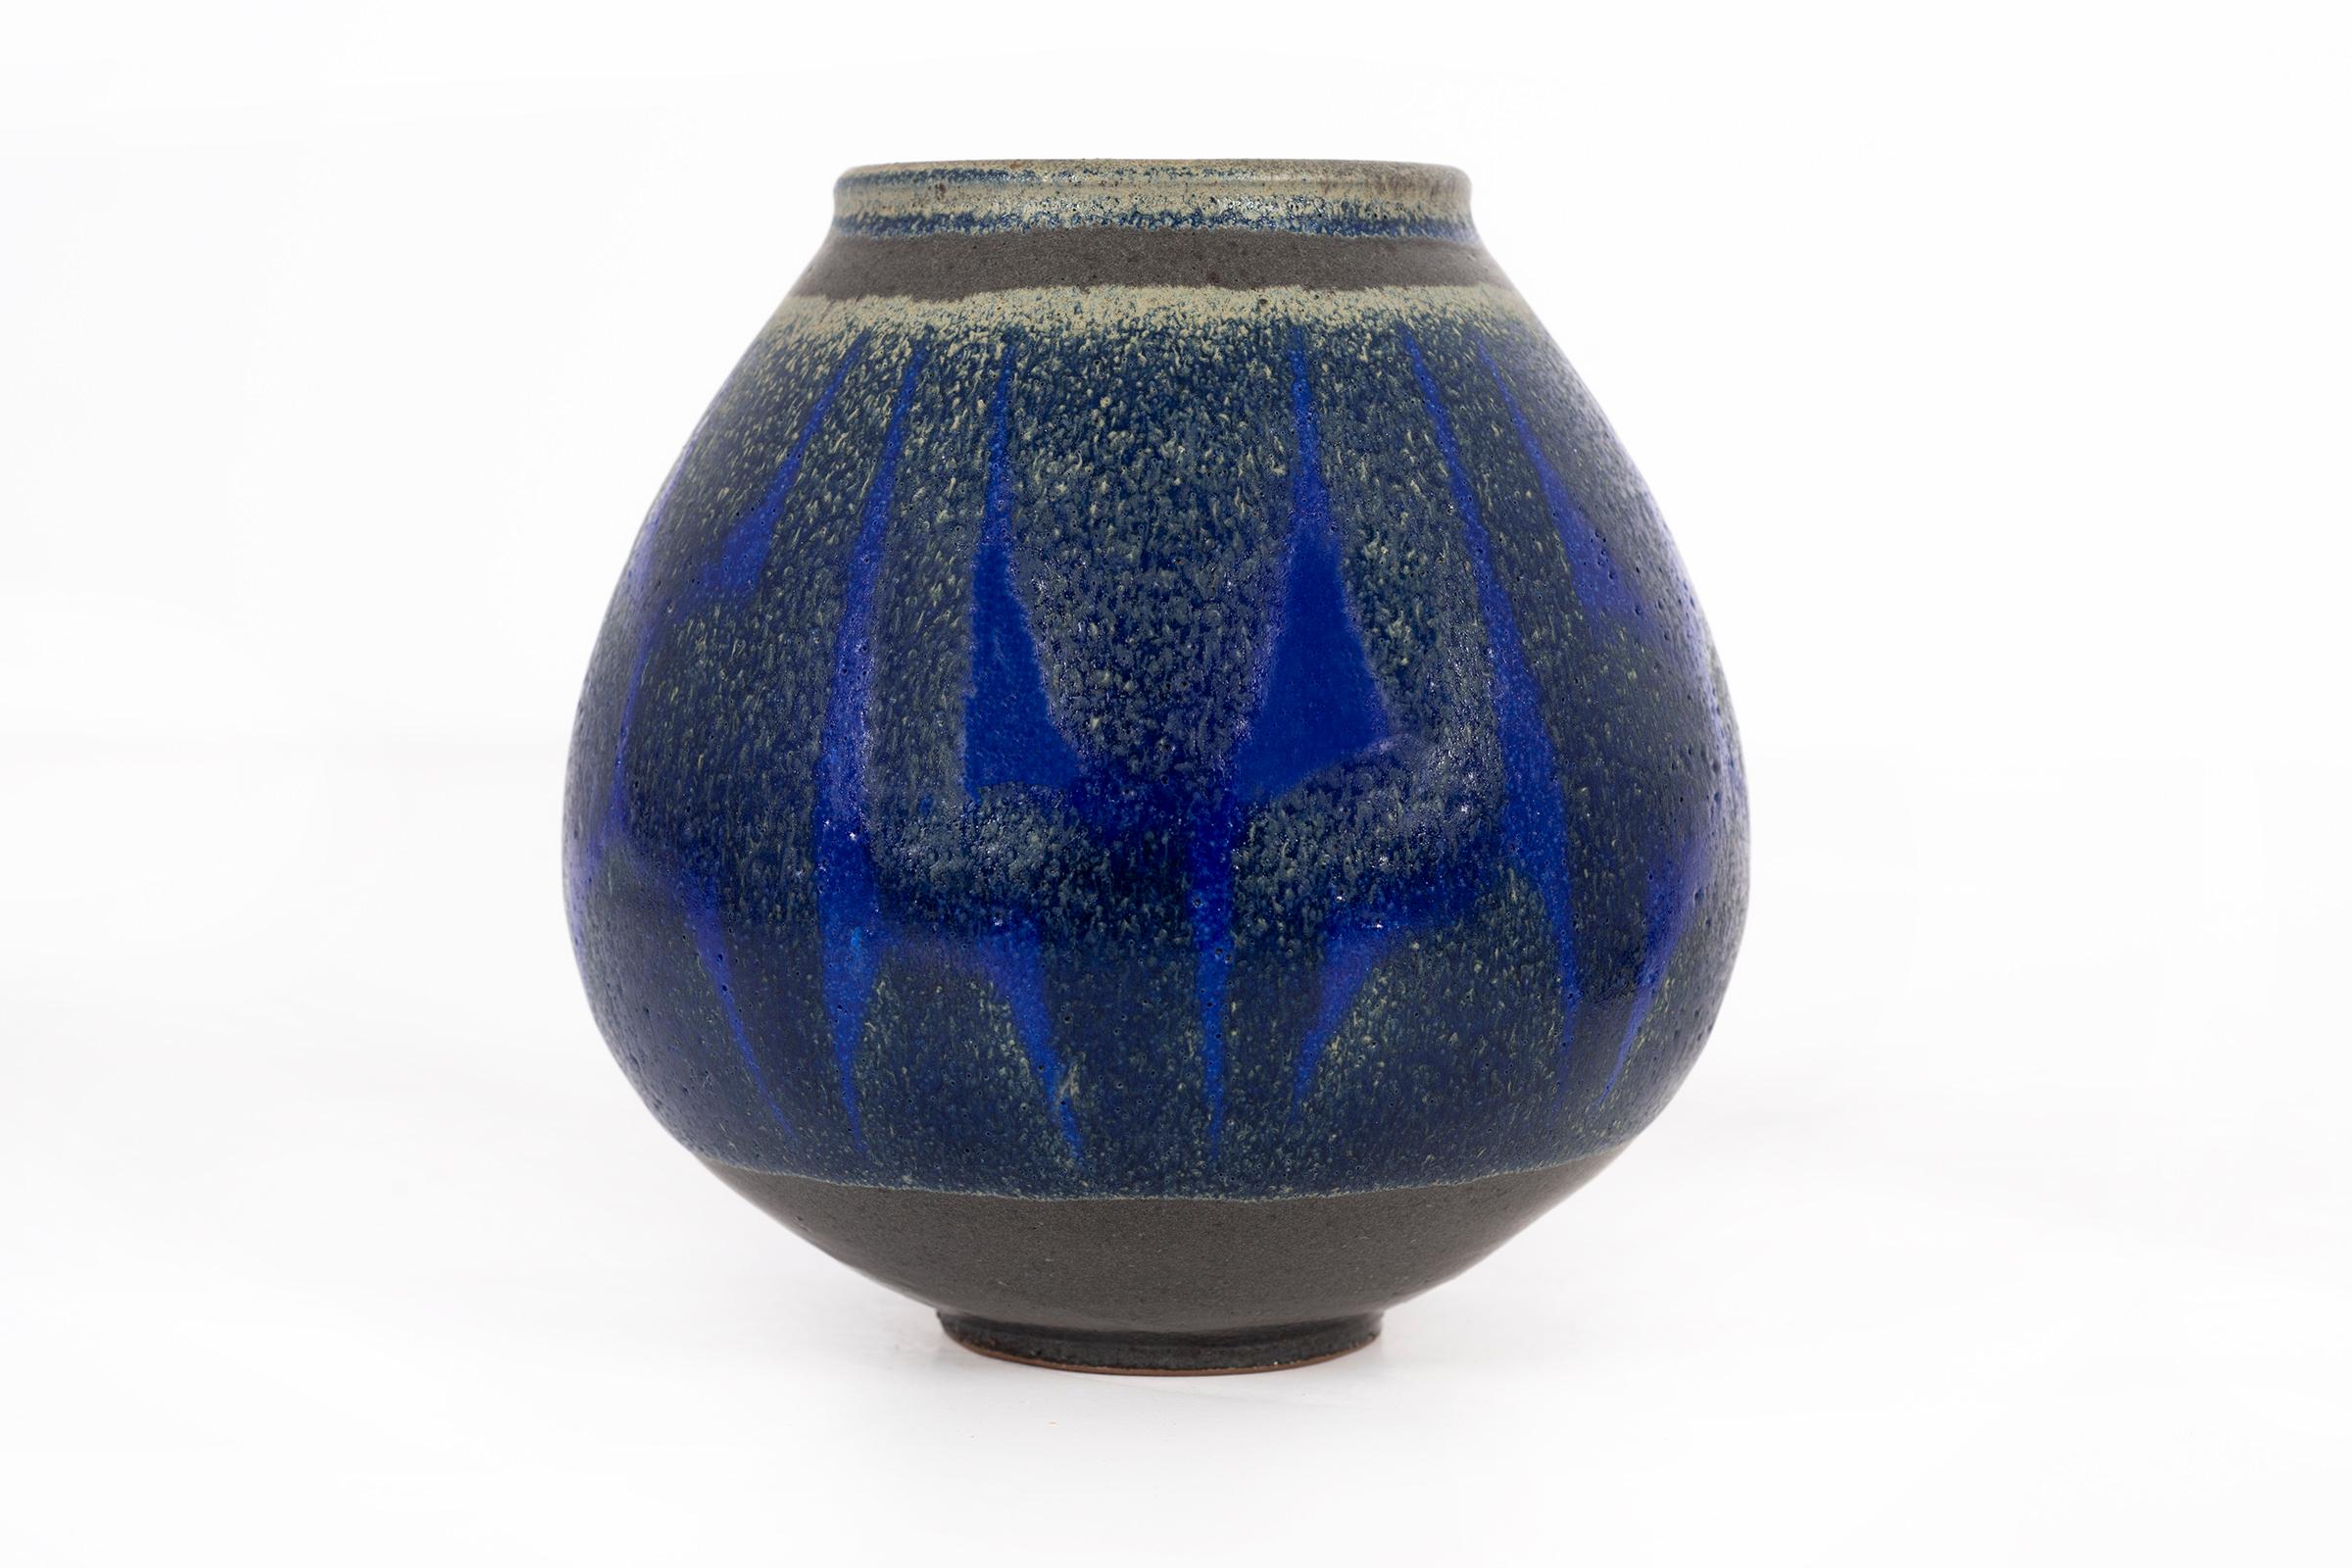 Clyde Burt ceramic vase in glazed stoneware with abstract multicolored glaze.
Signed to underside: [CB].
American, circa 1965.